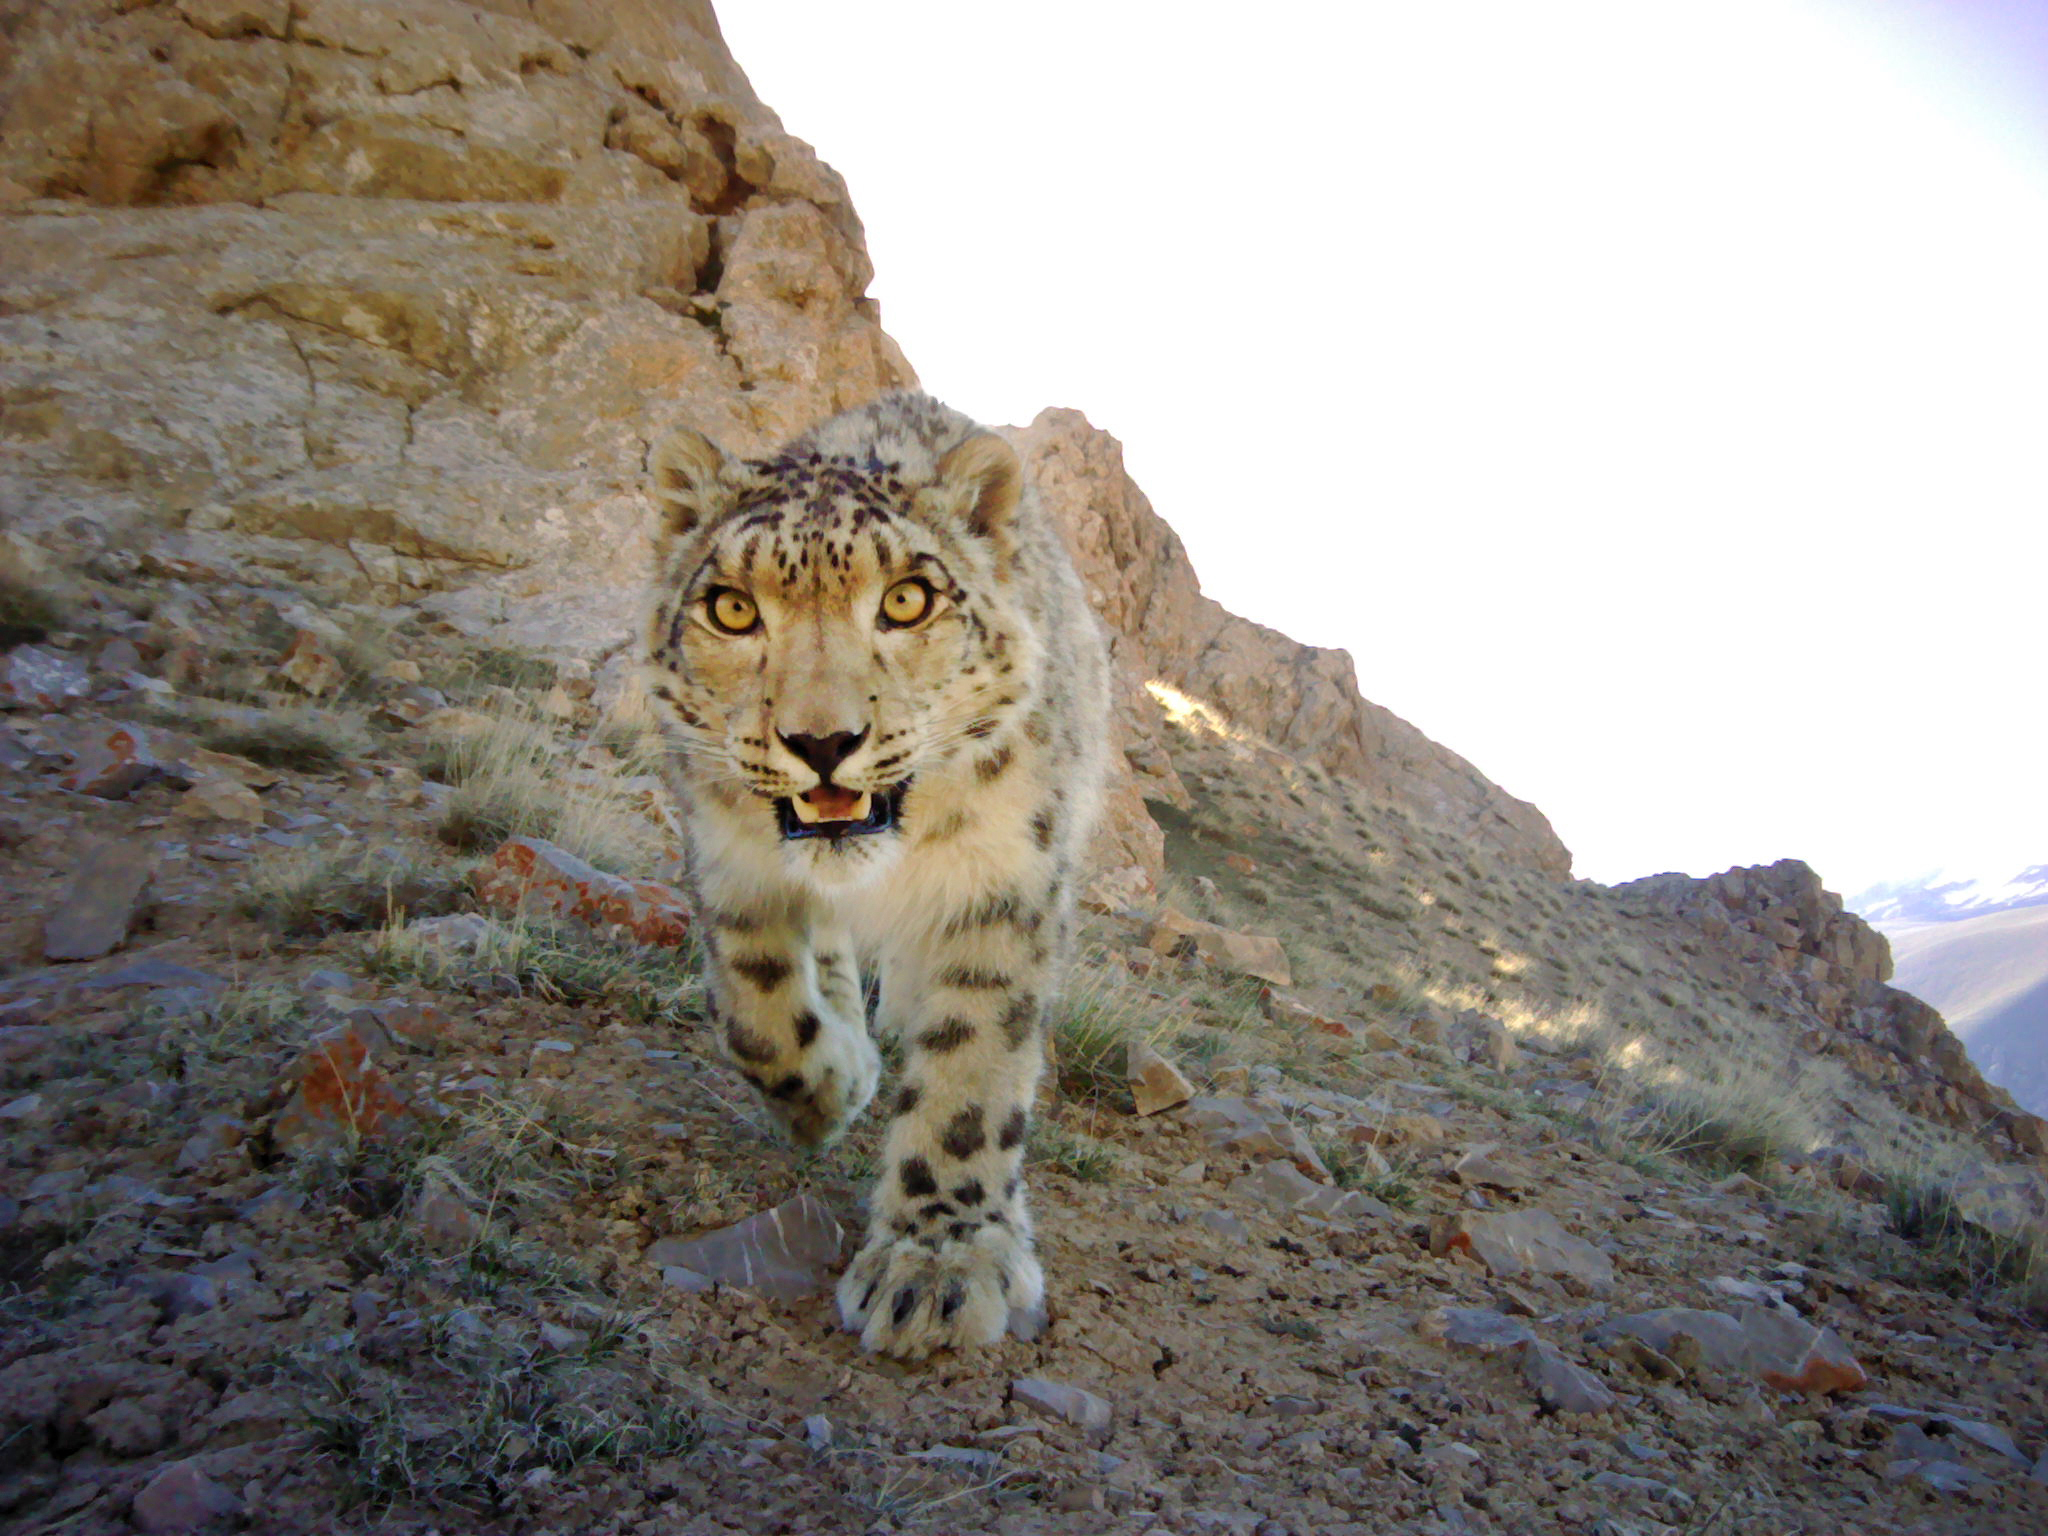 "Snow leopard approaching camera"